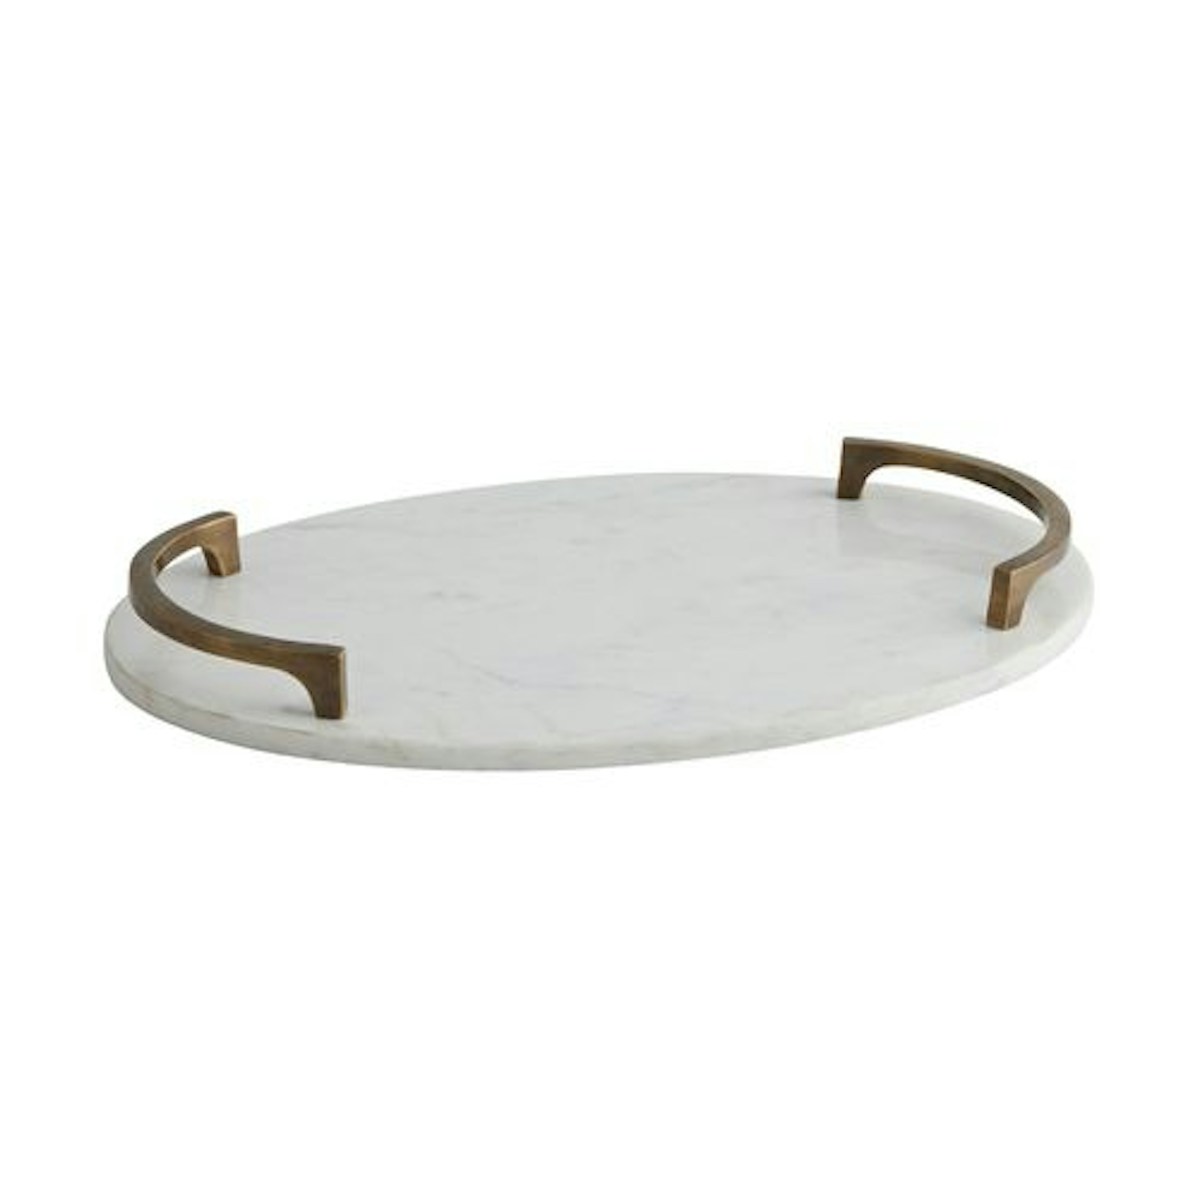 Marble Collie Tray - 21 Best Decorative Trays To Buy For Your Tabletop - Style Guide - LuxDeco.com